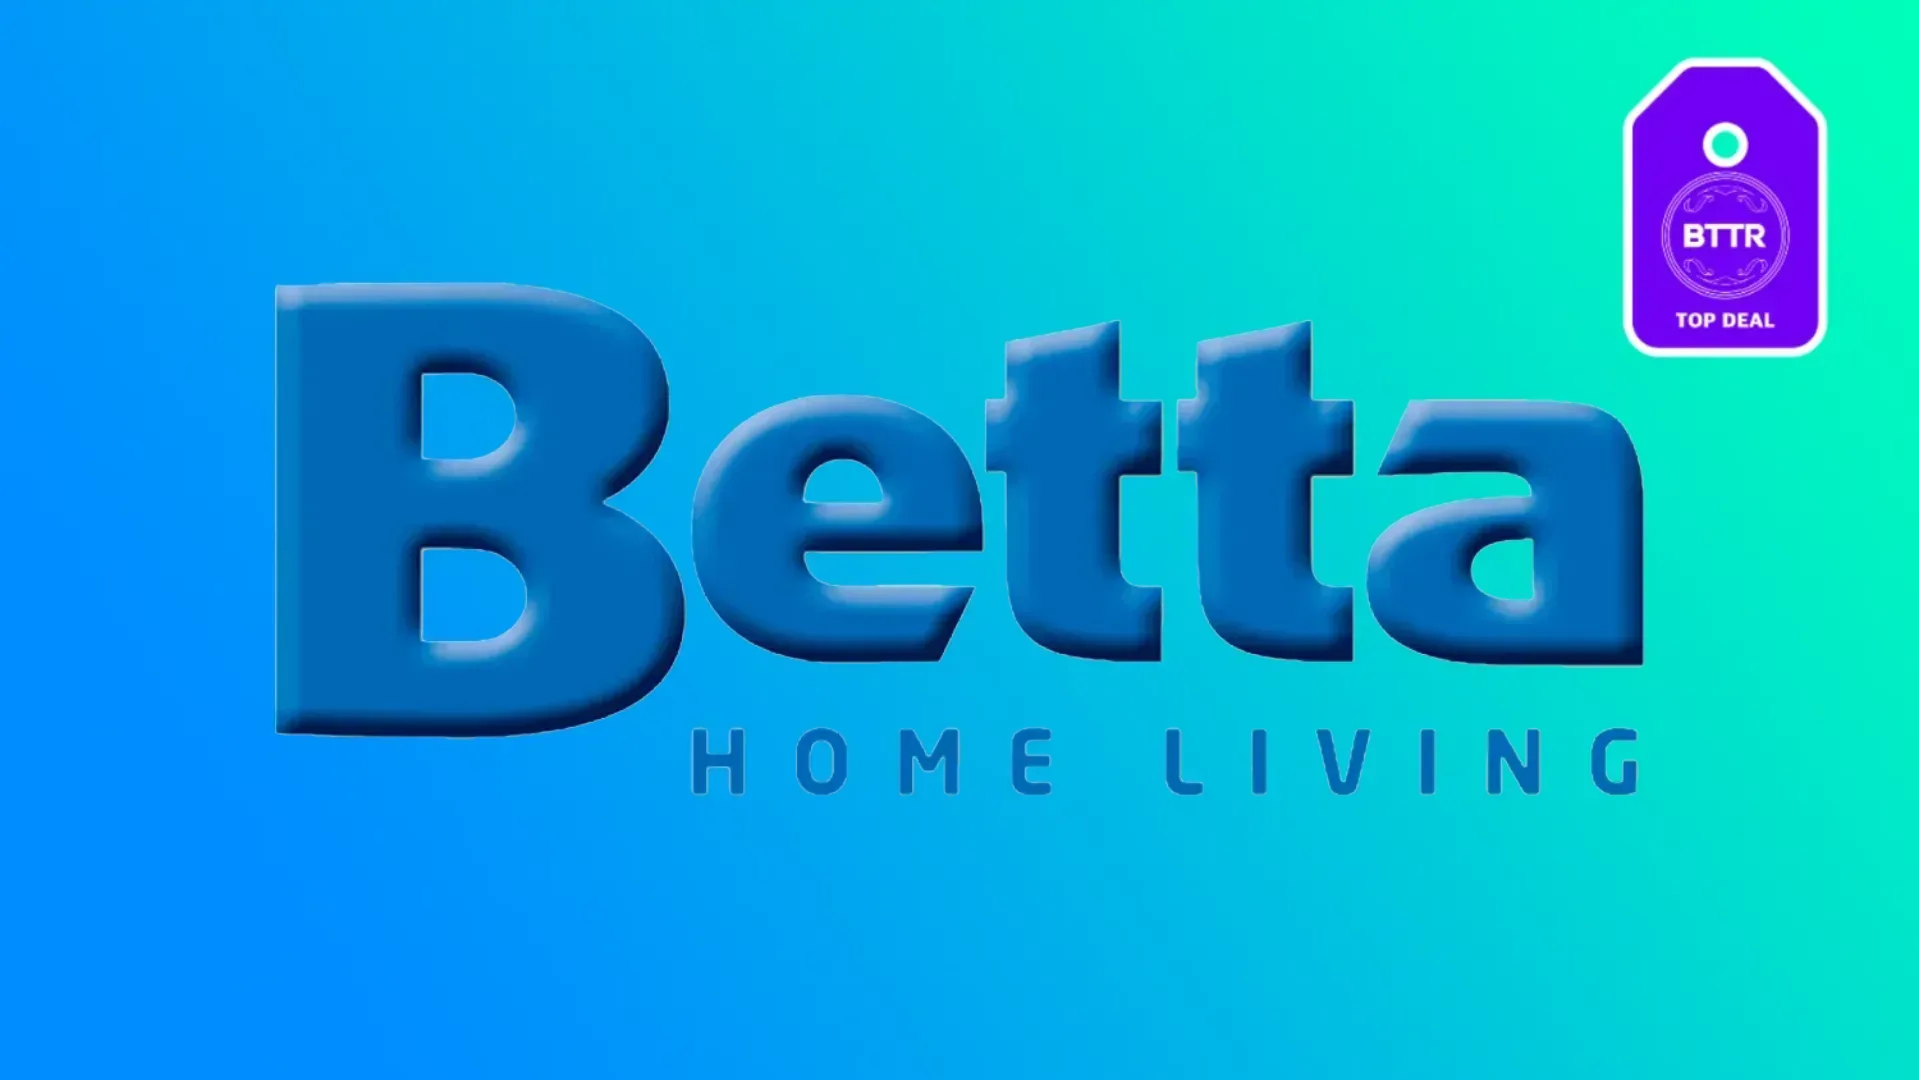 Betta Home Living logo with gradient background and a BTTR deal logo